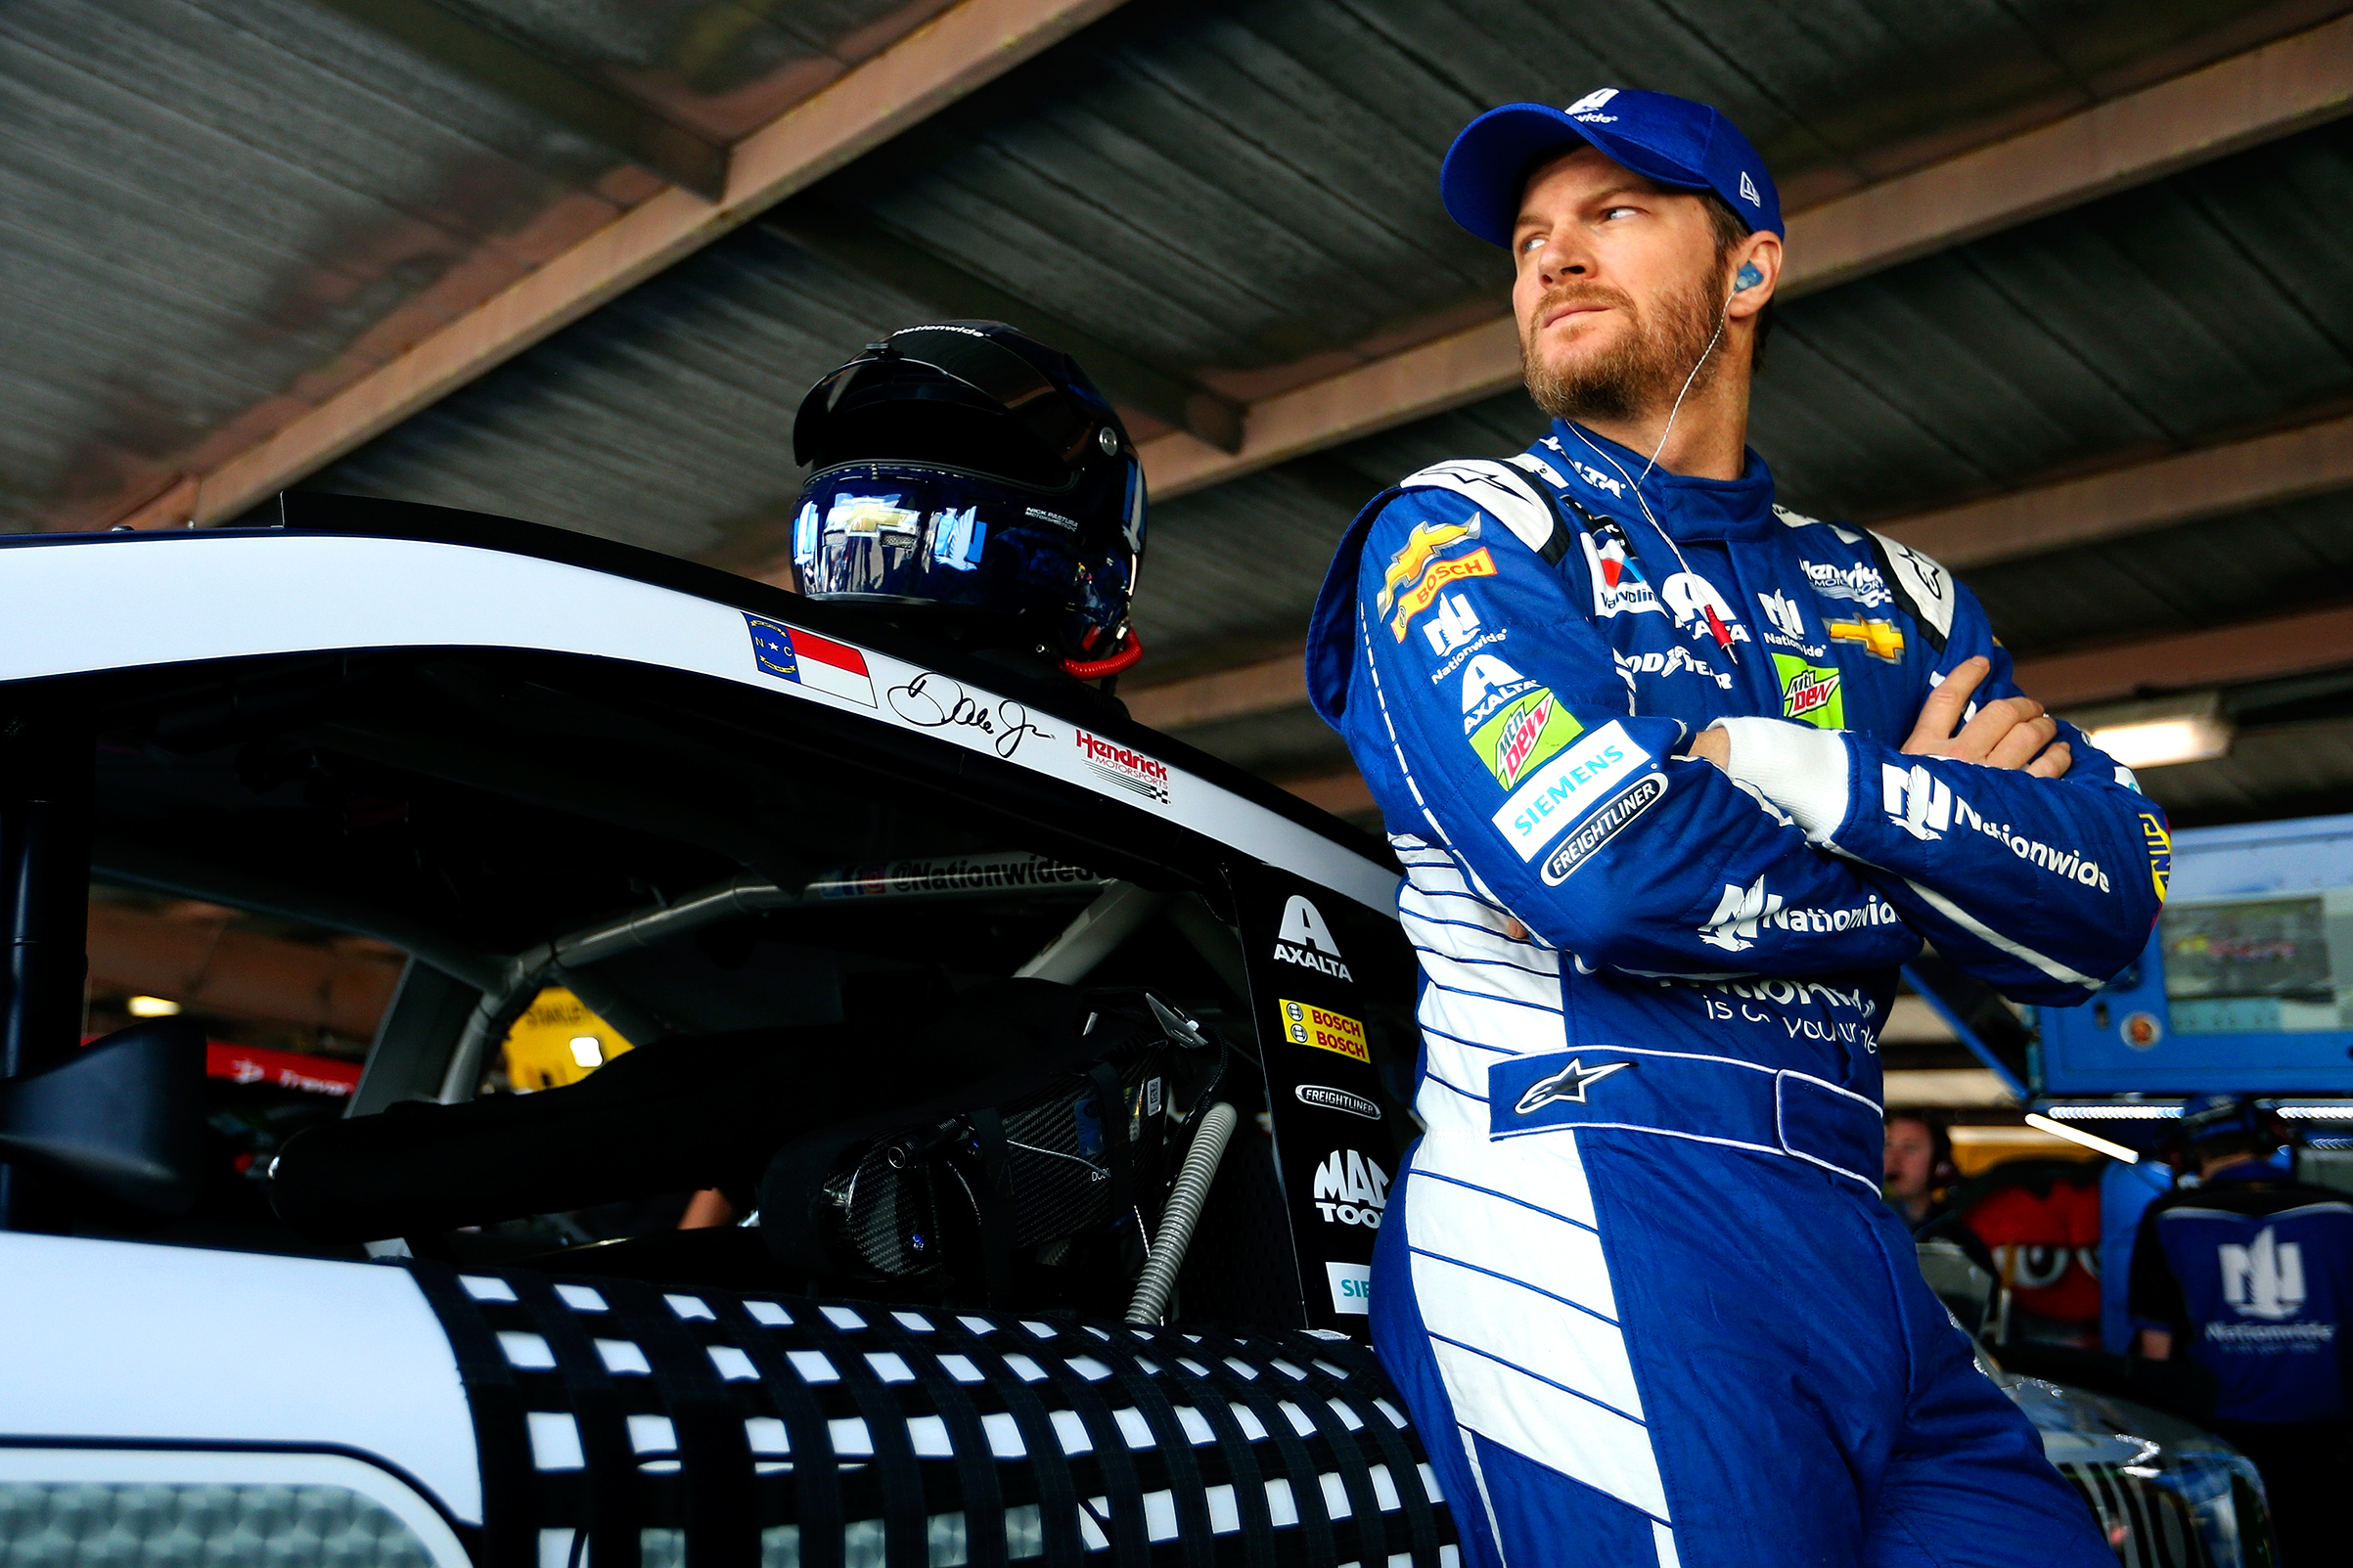 dale-earnhardt-jr-is-going-out-on-his-own-terms